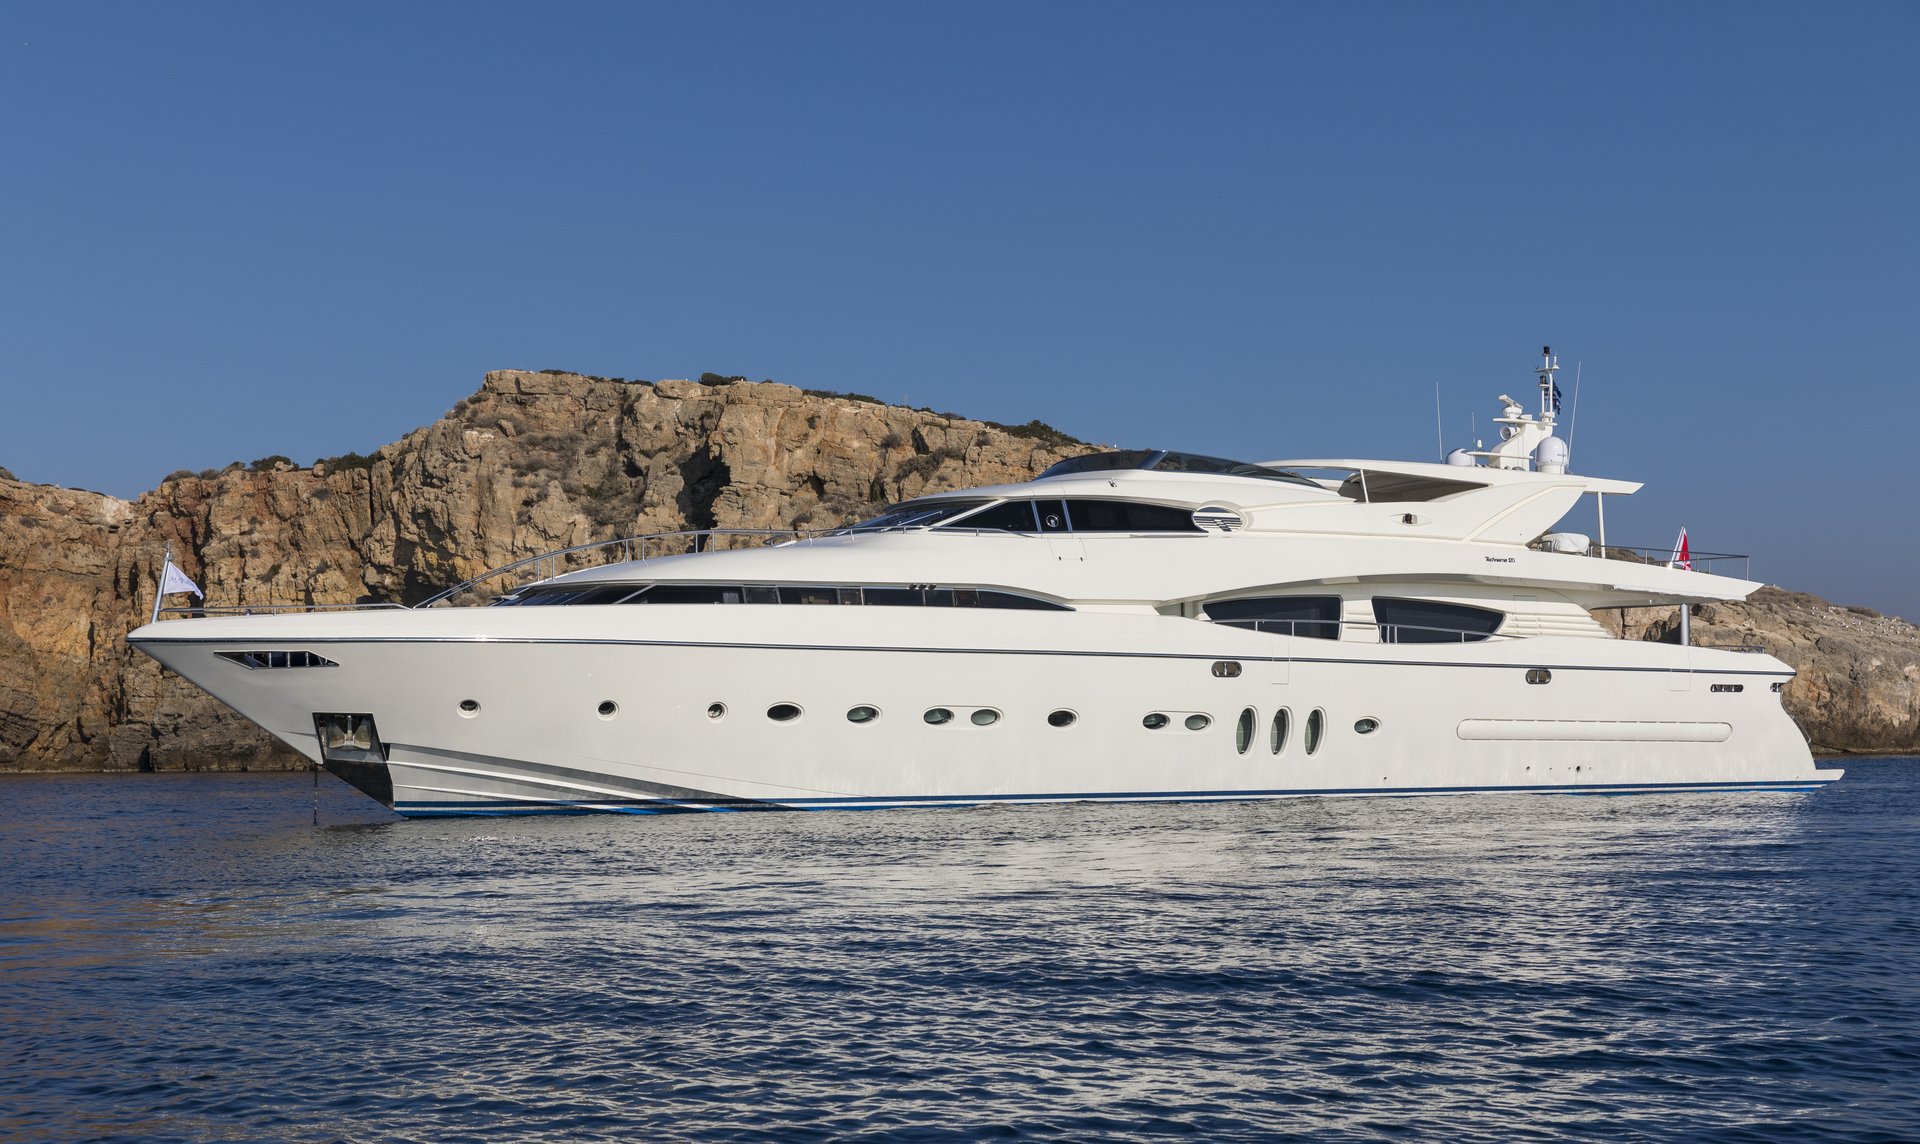 M/Y RINI V yacht for charter anchored